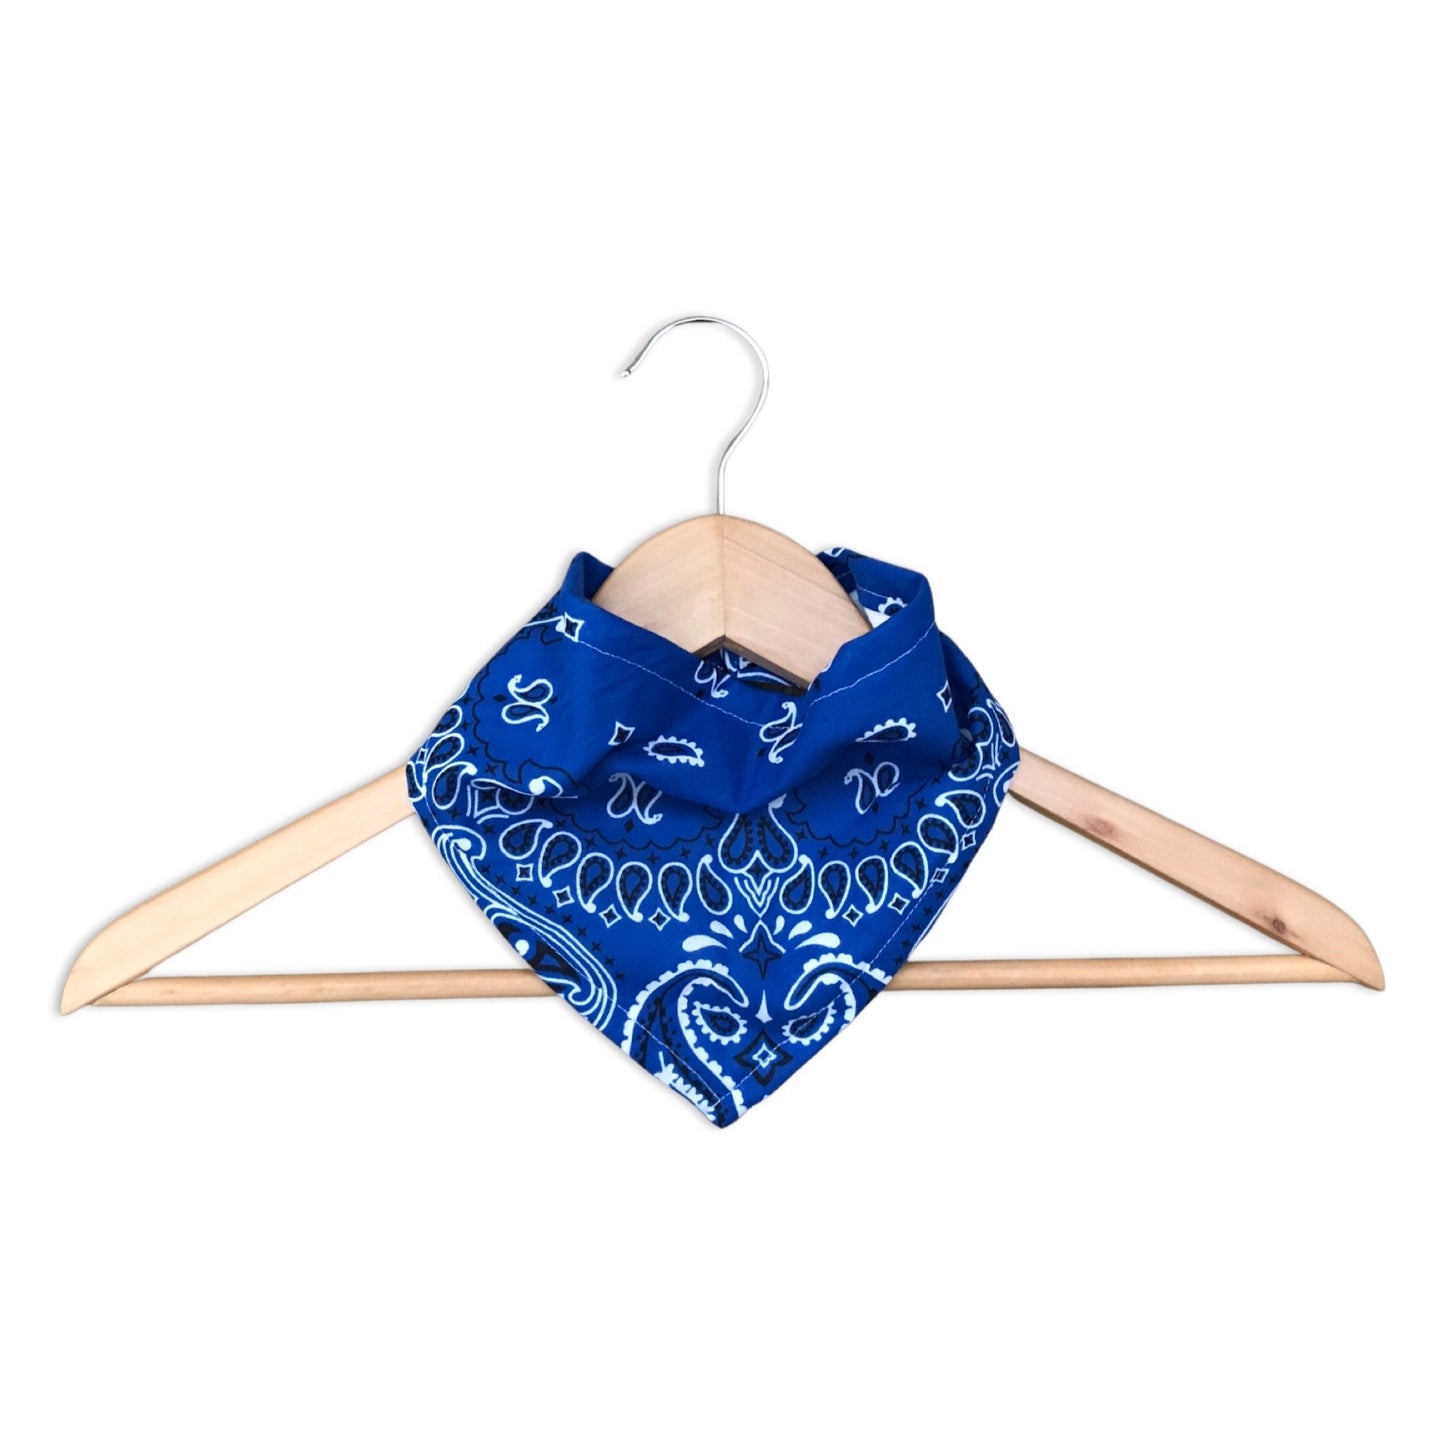 Bandana Bib for Baby - Available in 10 colors